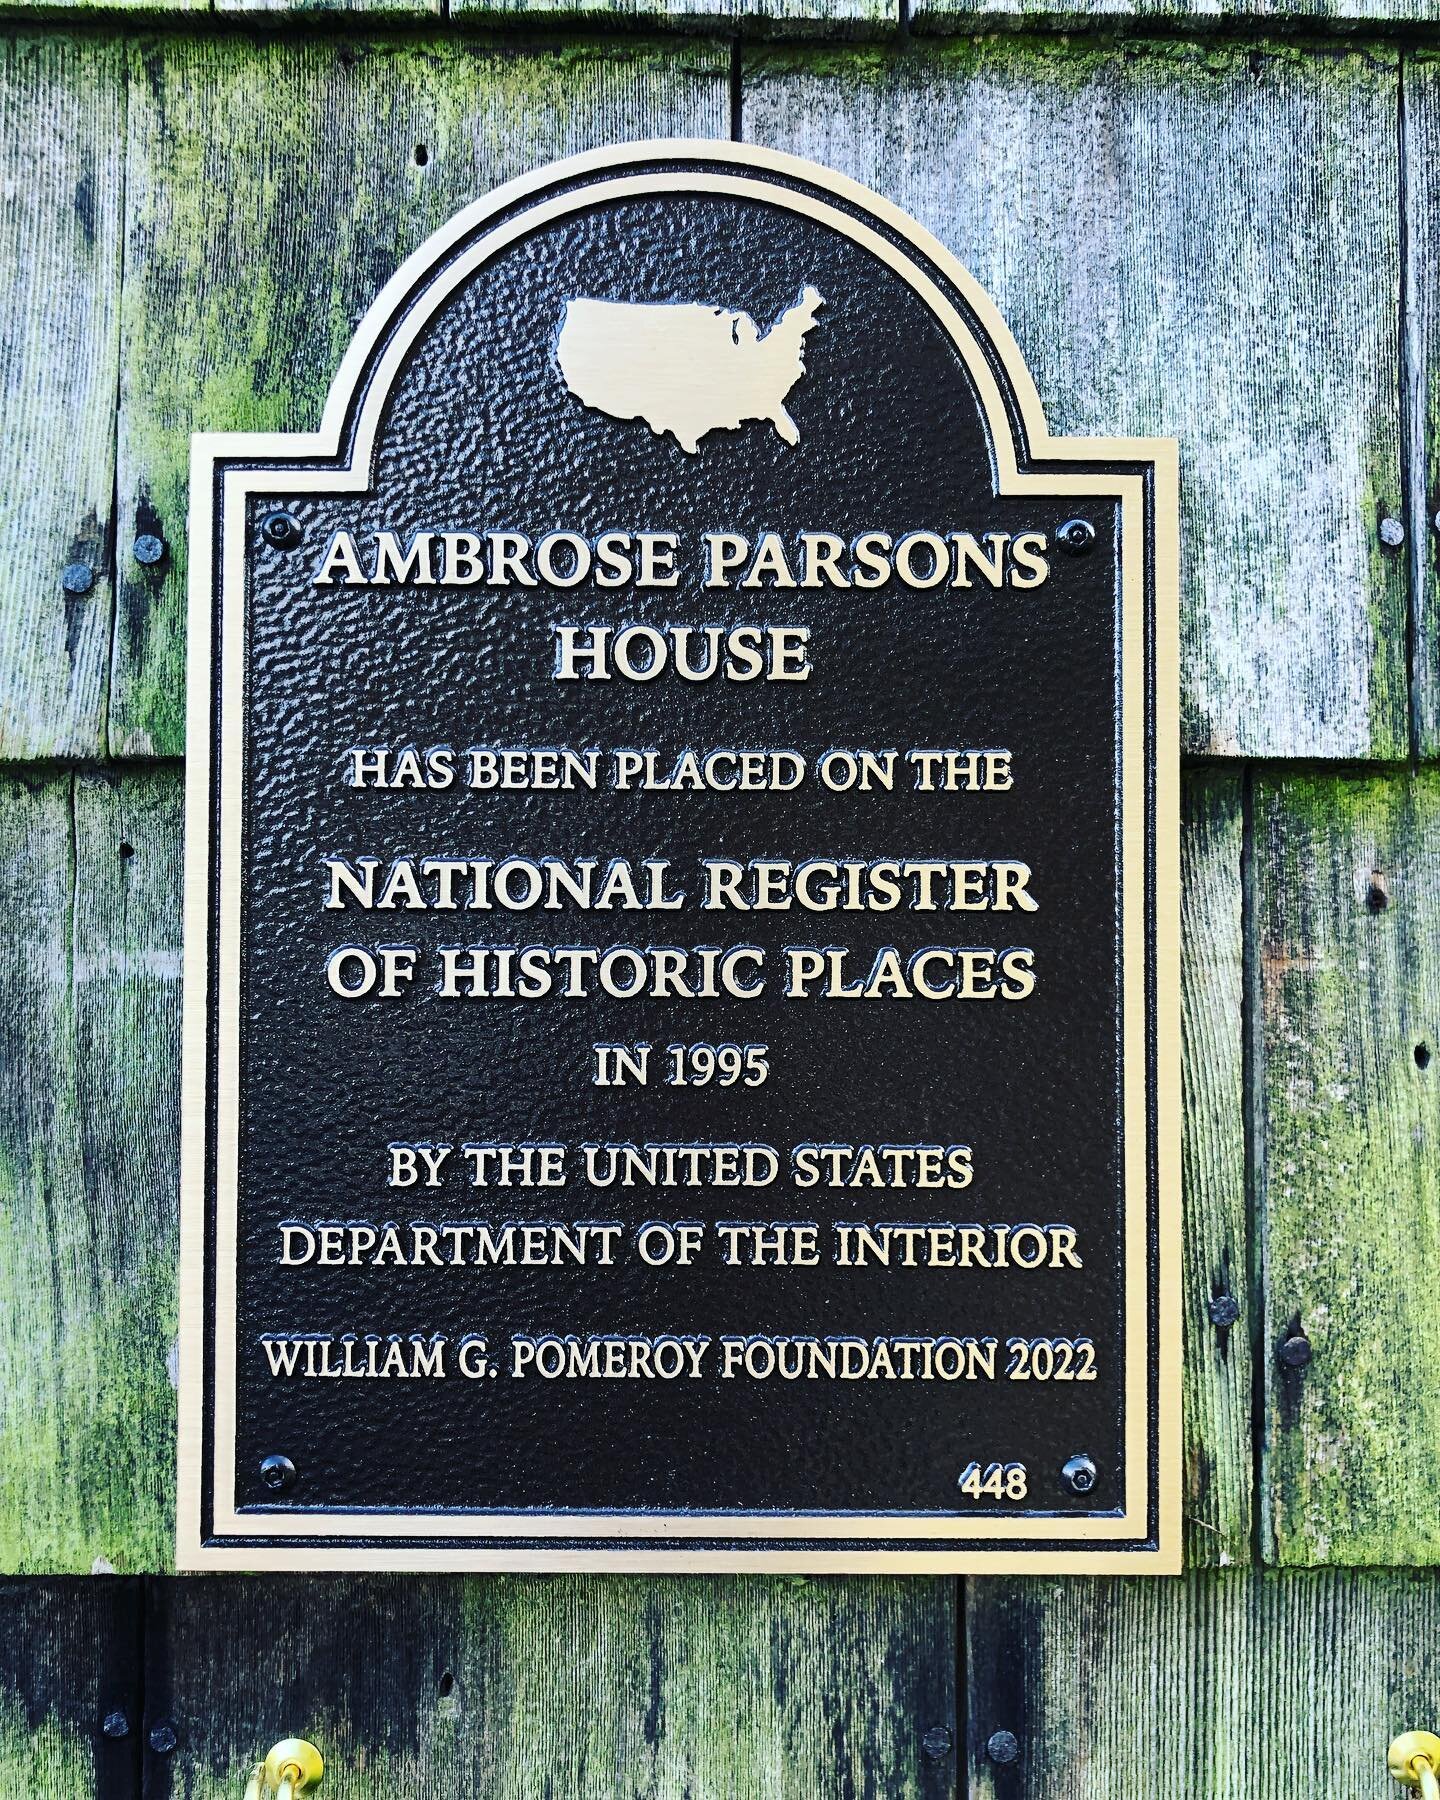 The Ambrose Parsons House (also known as the Springs Library!) is one of the stops on our Springs Historical Hike.  Meet Wednesday March  22 at 10 AM at Ashawagh Hall in Springs.  Leader: Monica Rich, Monica.rich.nc@gmail.com or 919-349-3650.  @easth